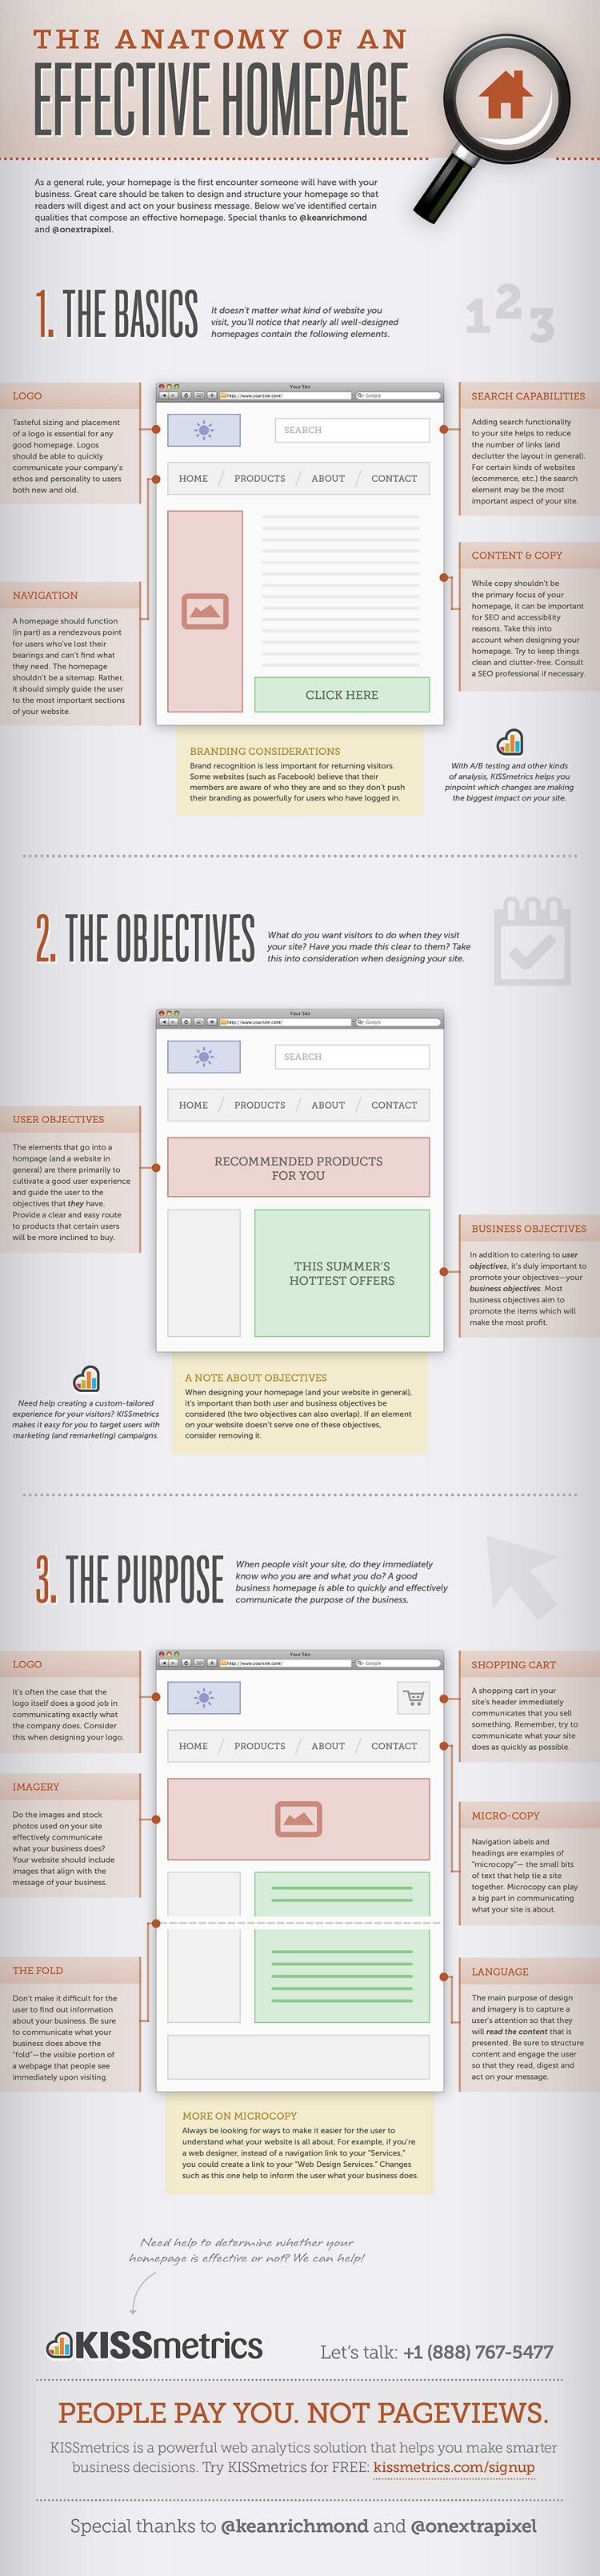 The bigger version of The Anatomy of an Effective Homepage